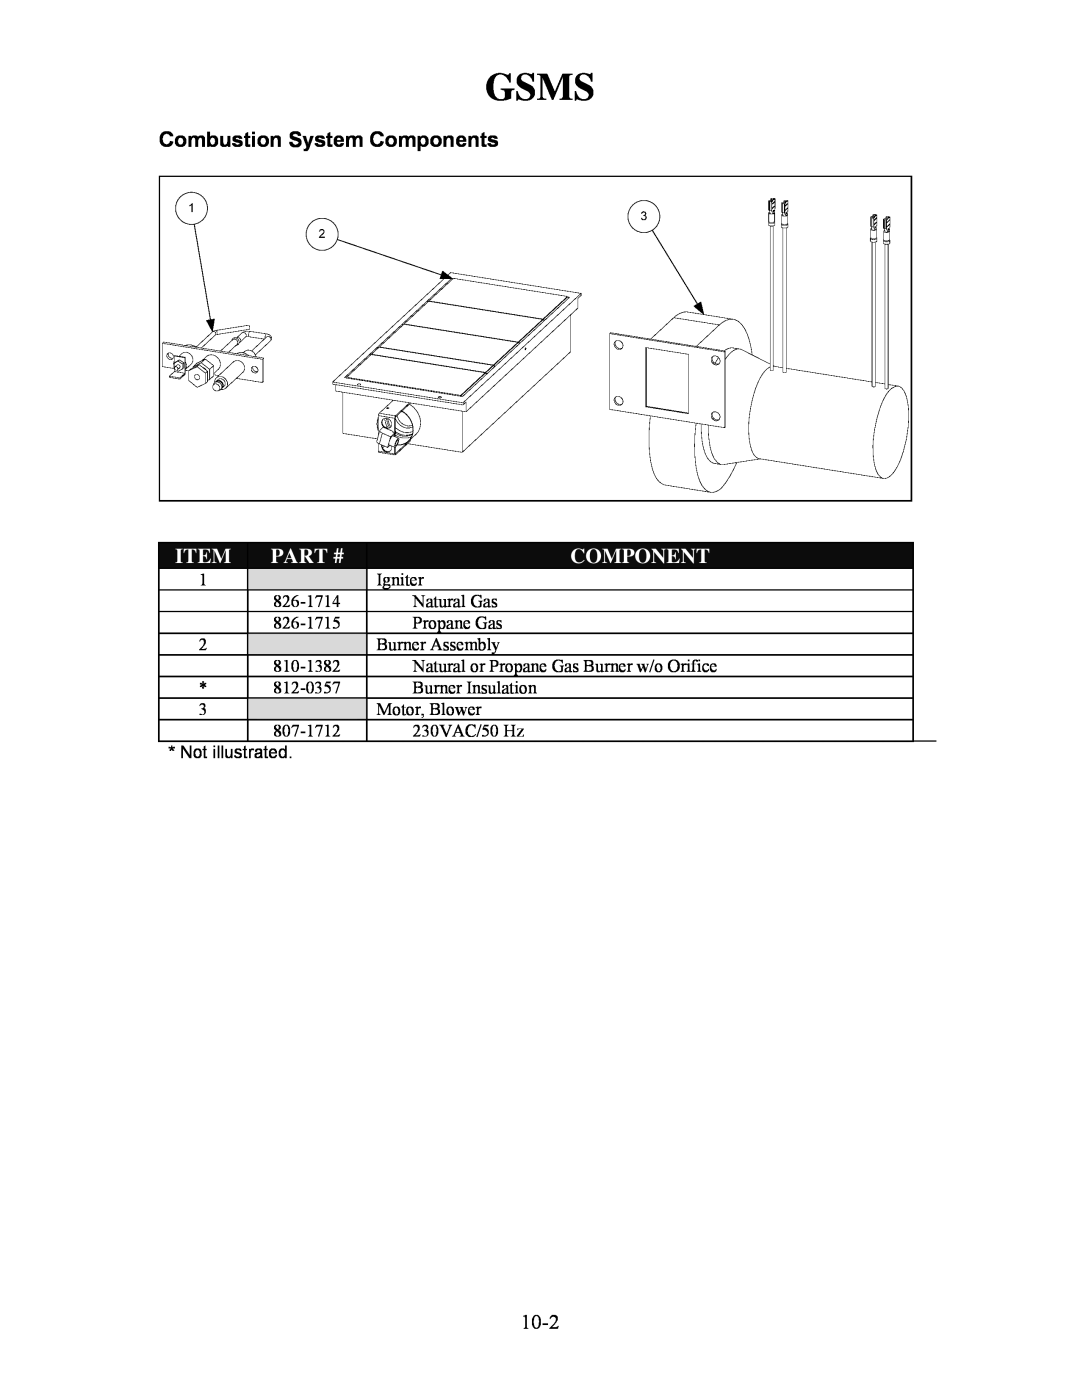 Frymaster H50 manual 10-2, Gsms, Combustion System Components, Part # 